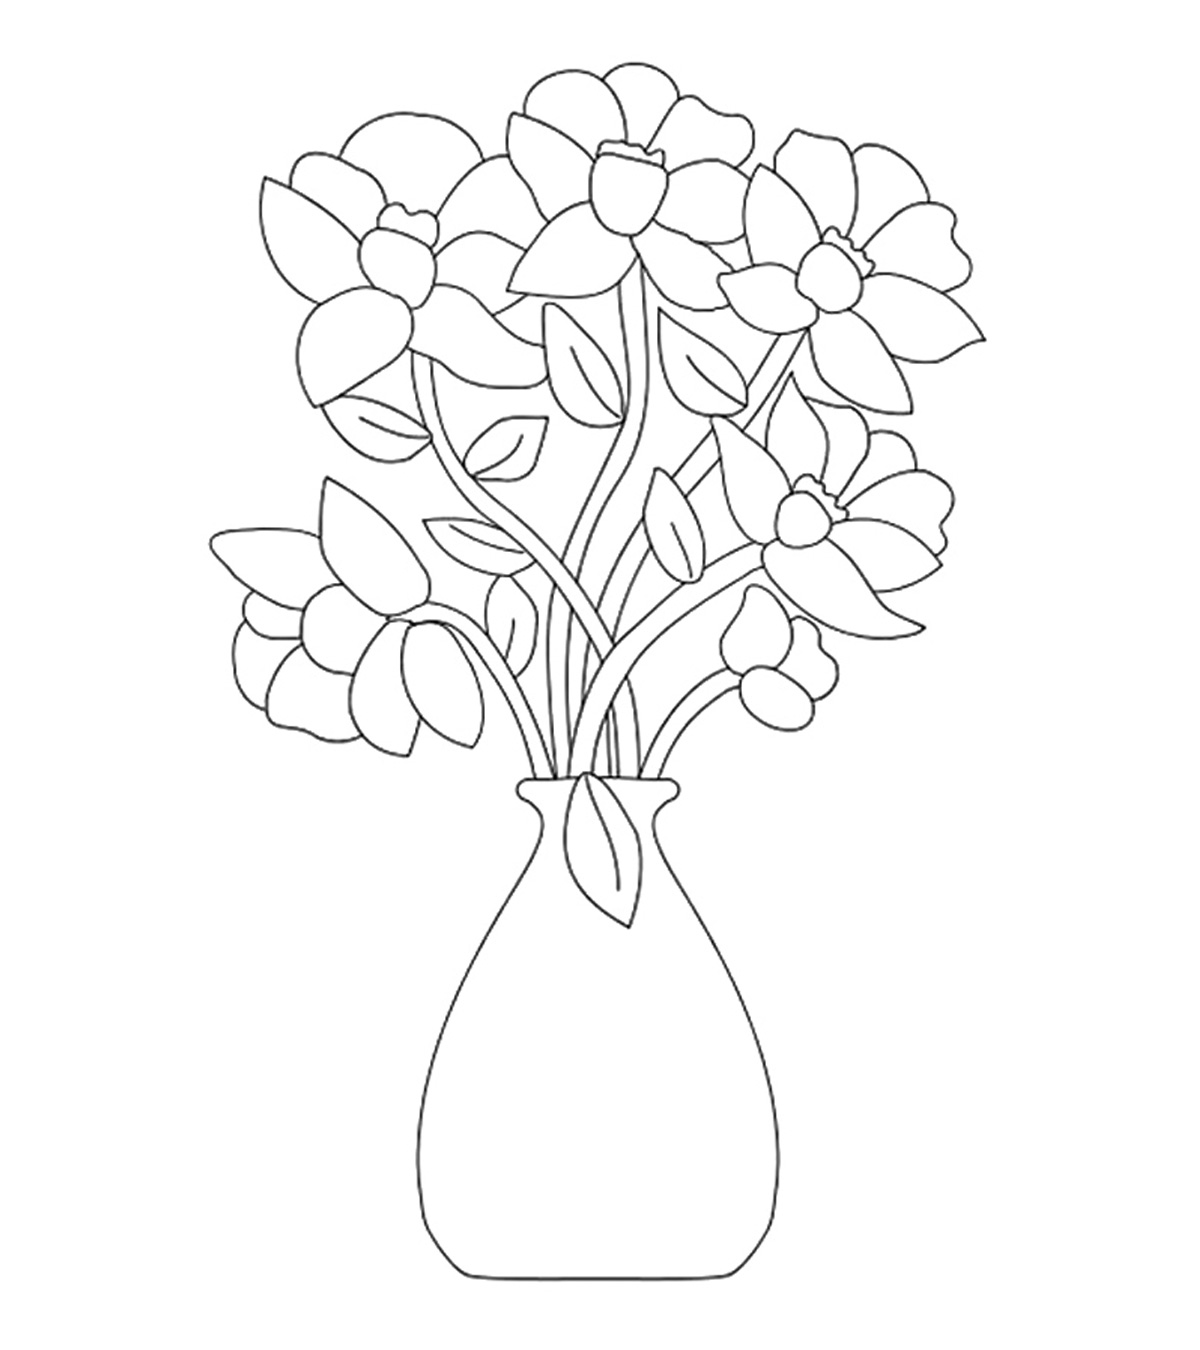 47 Beautiful Flowers Coloring Pages Your Toddler Will Love To Color